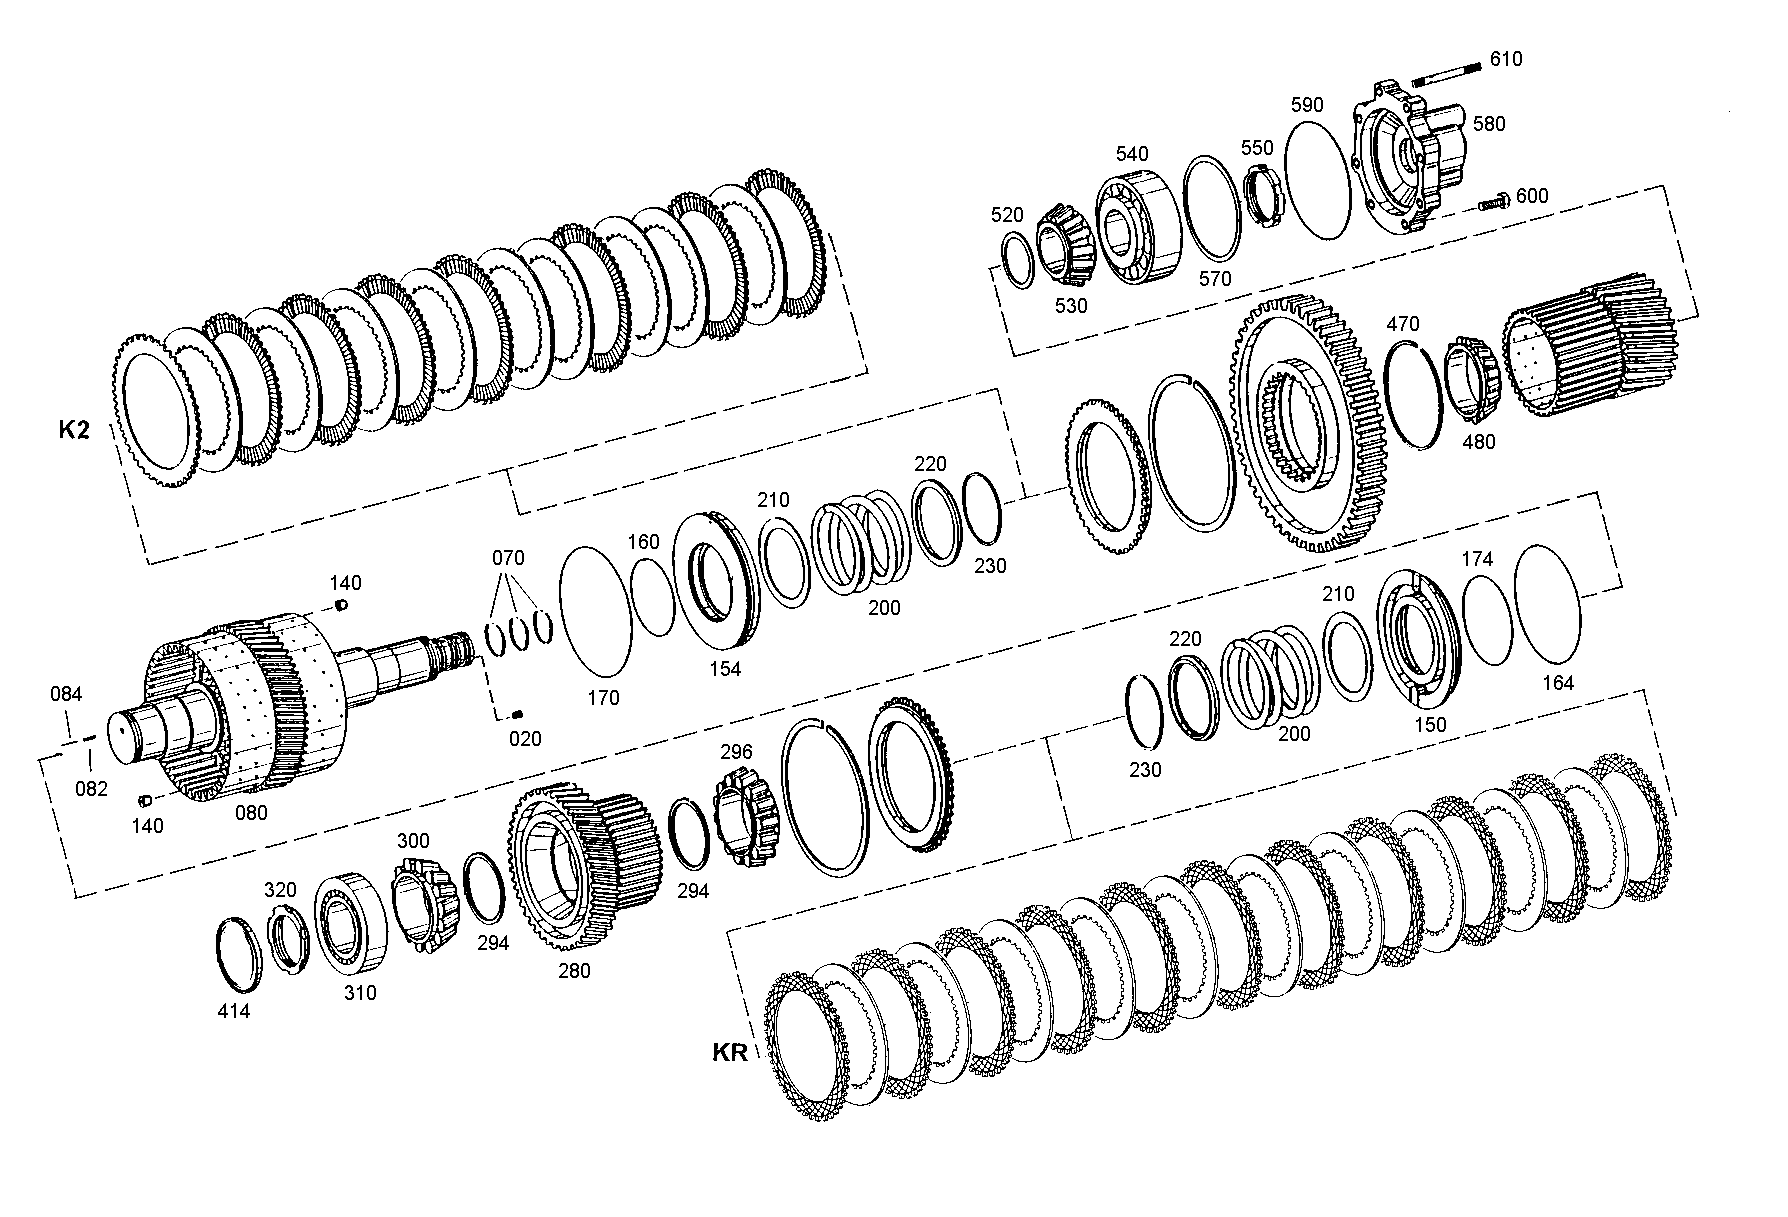 drawing for BUSINESS SOLUTIONS / DIV.GESCO 100233A1 - WASHER (figure 3)